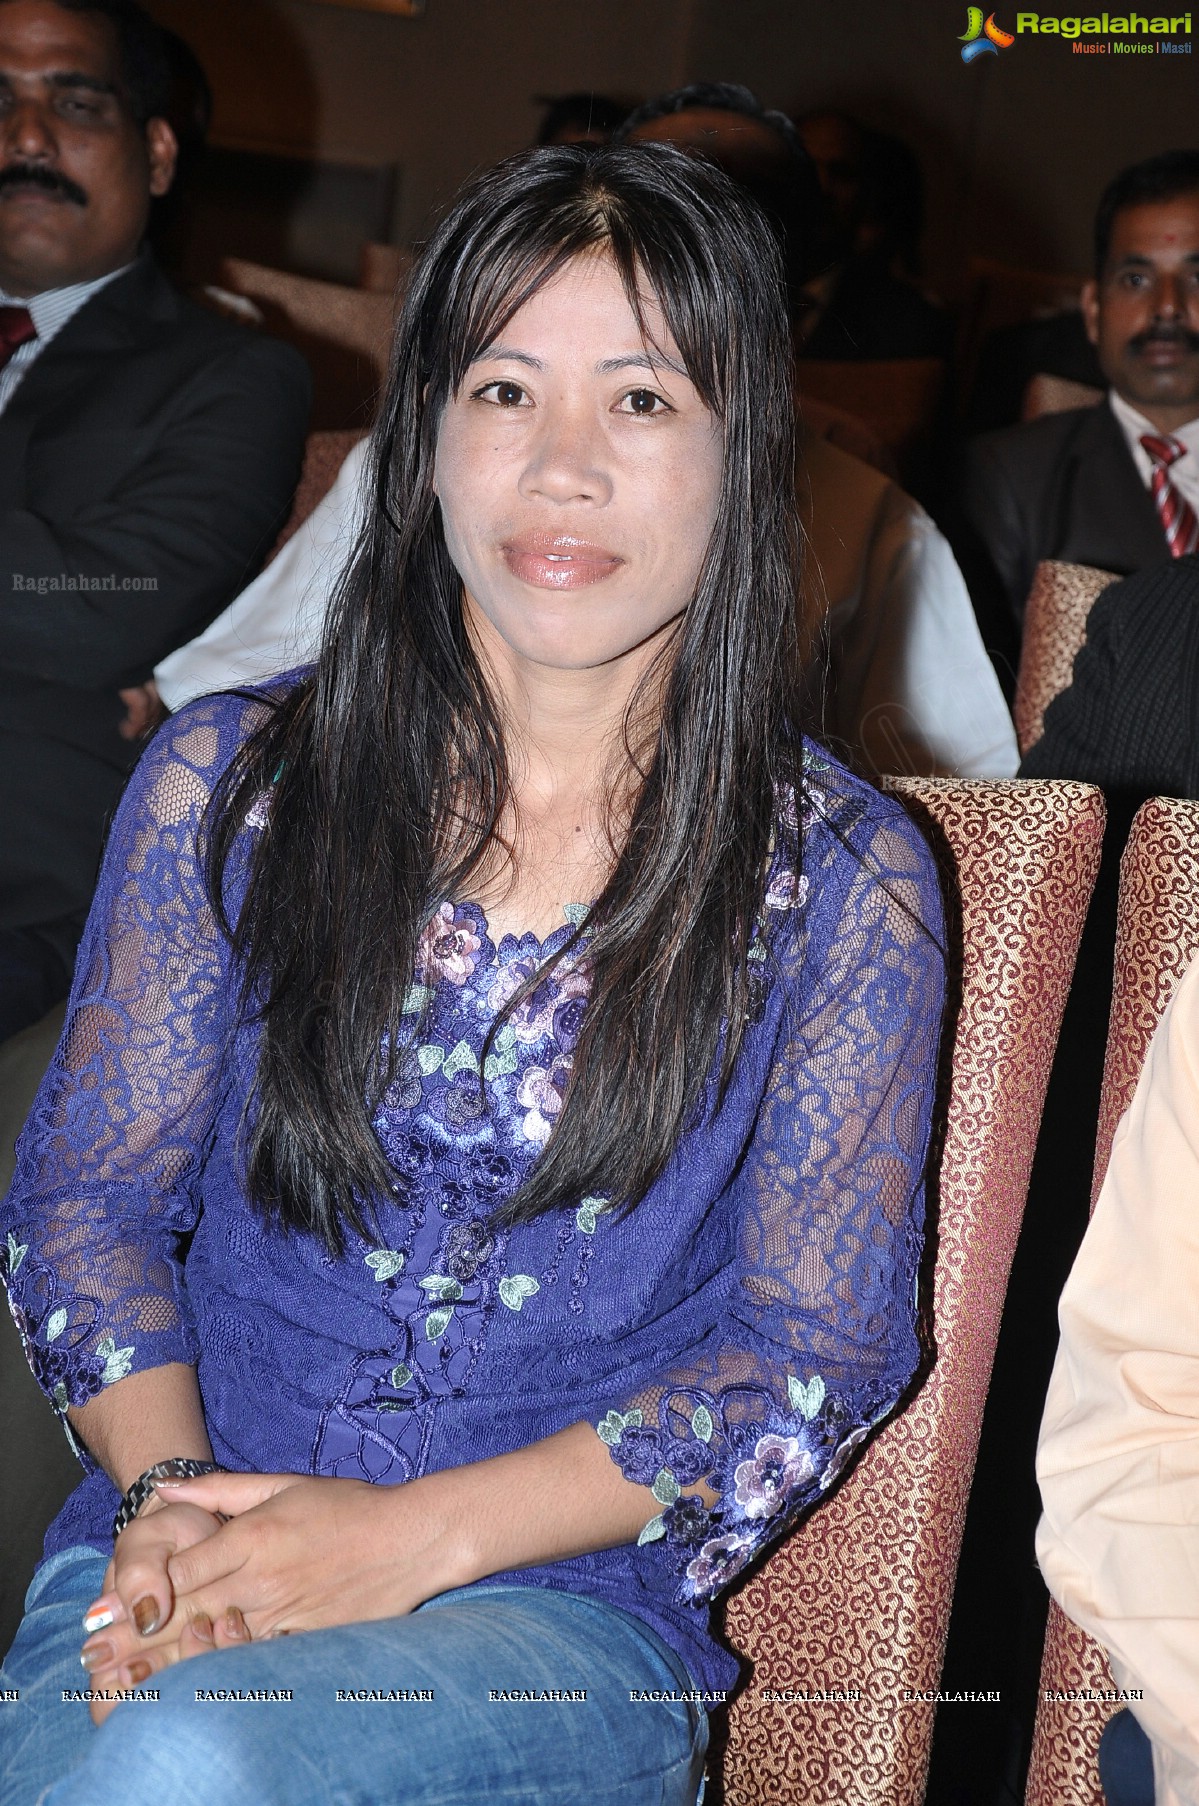 Incredible India felicitates London Olympic Bronze Medalist Mary Kom